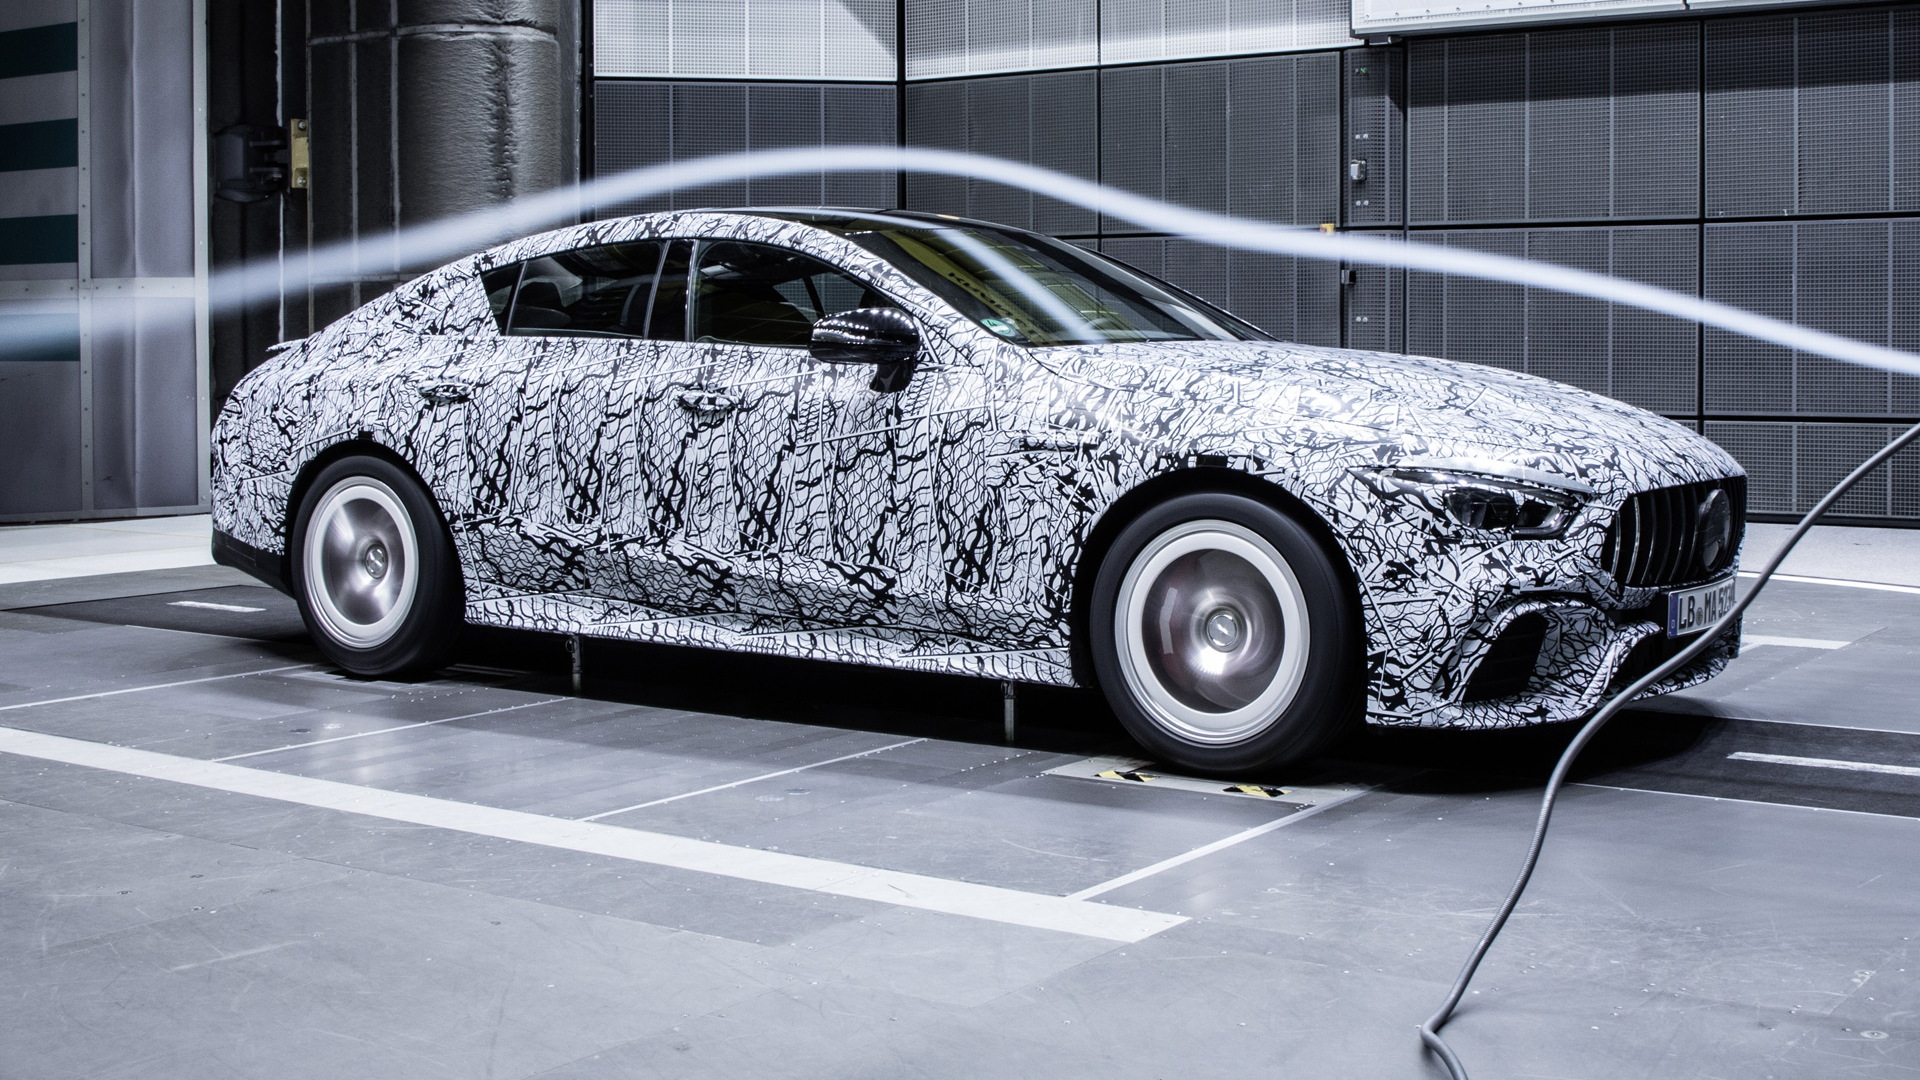 Teaser for Mercedes-AMG GT Coupe debuting at 2018 Geneva auto show